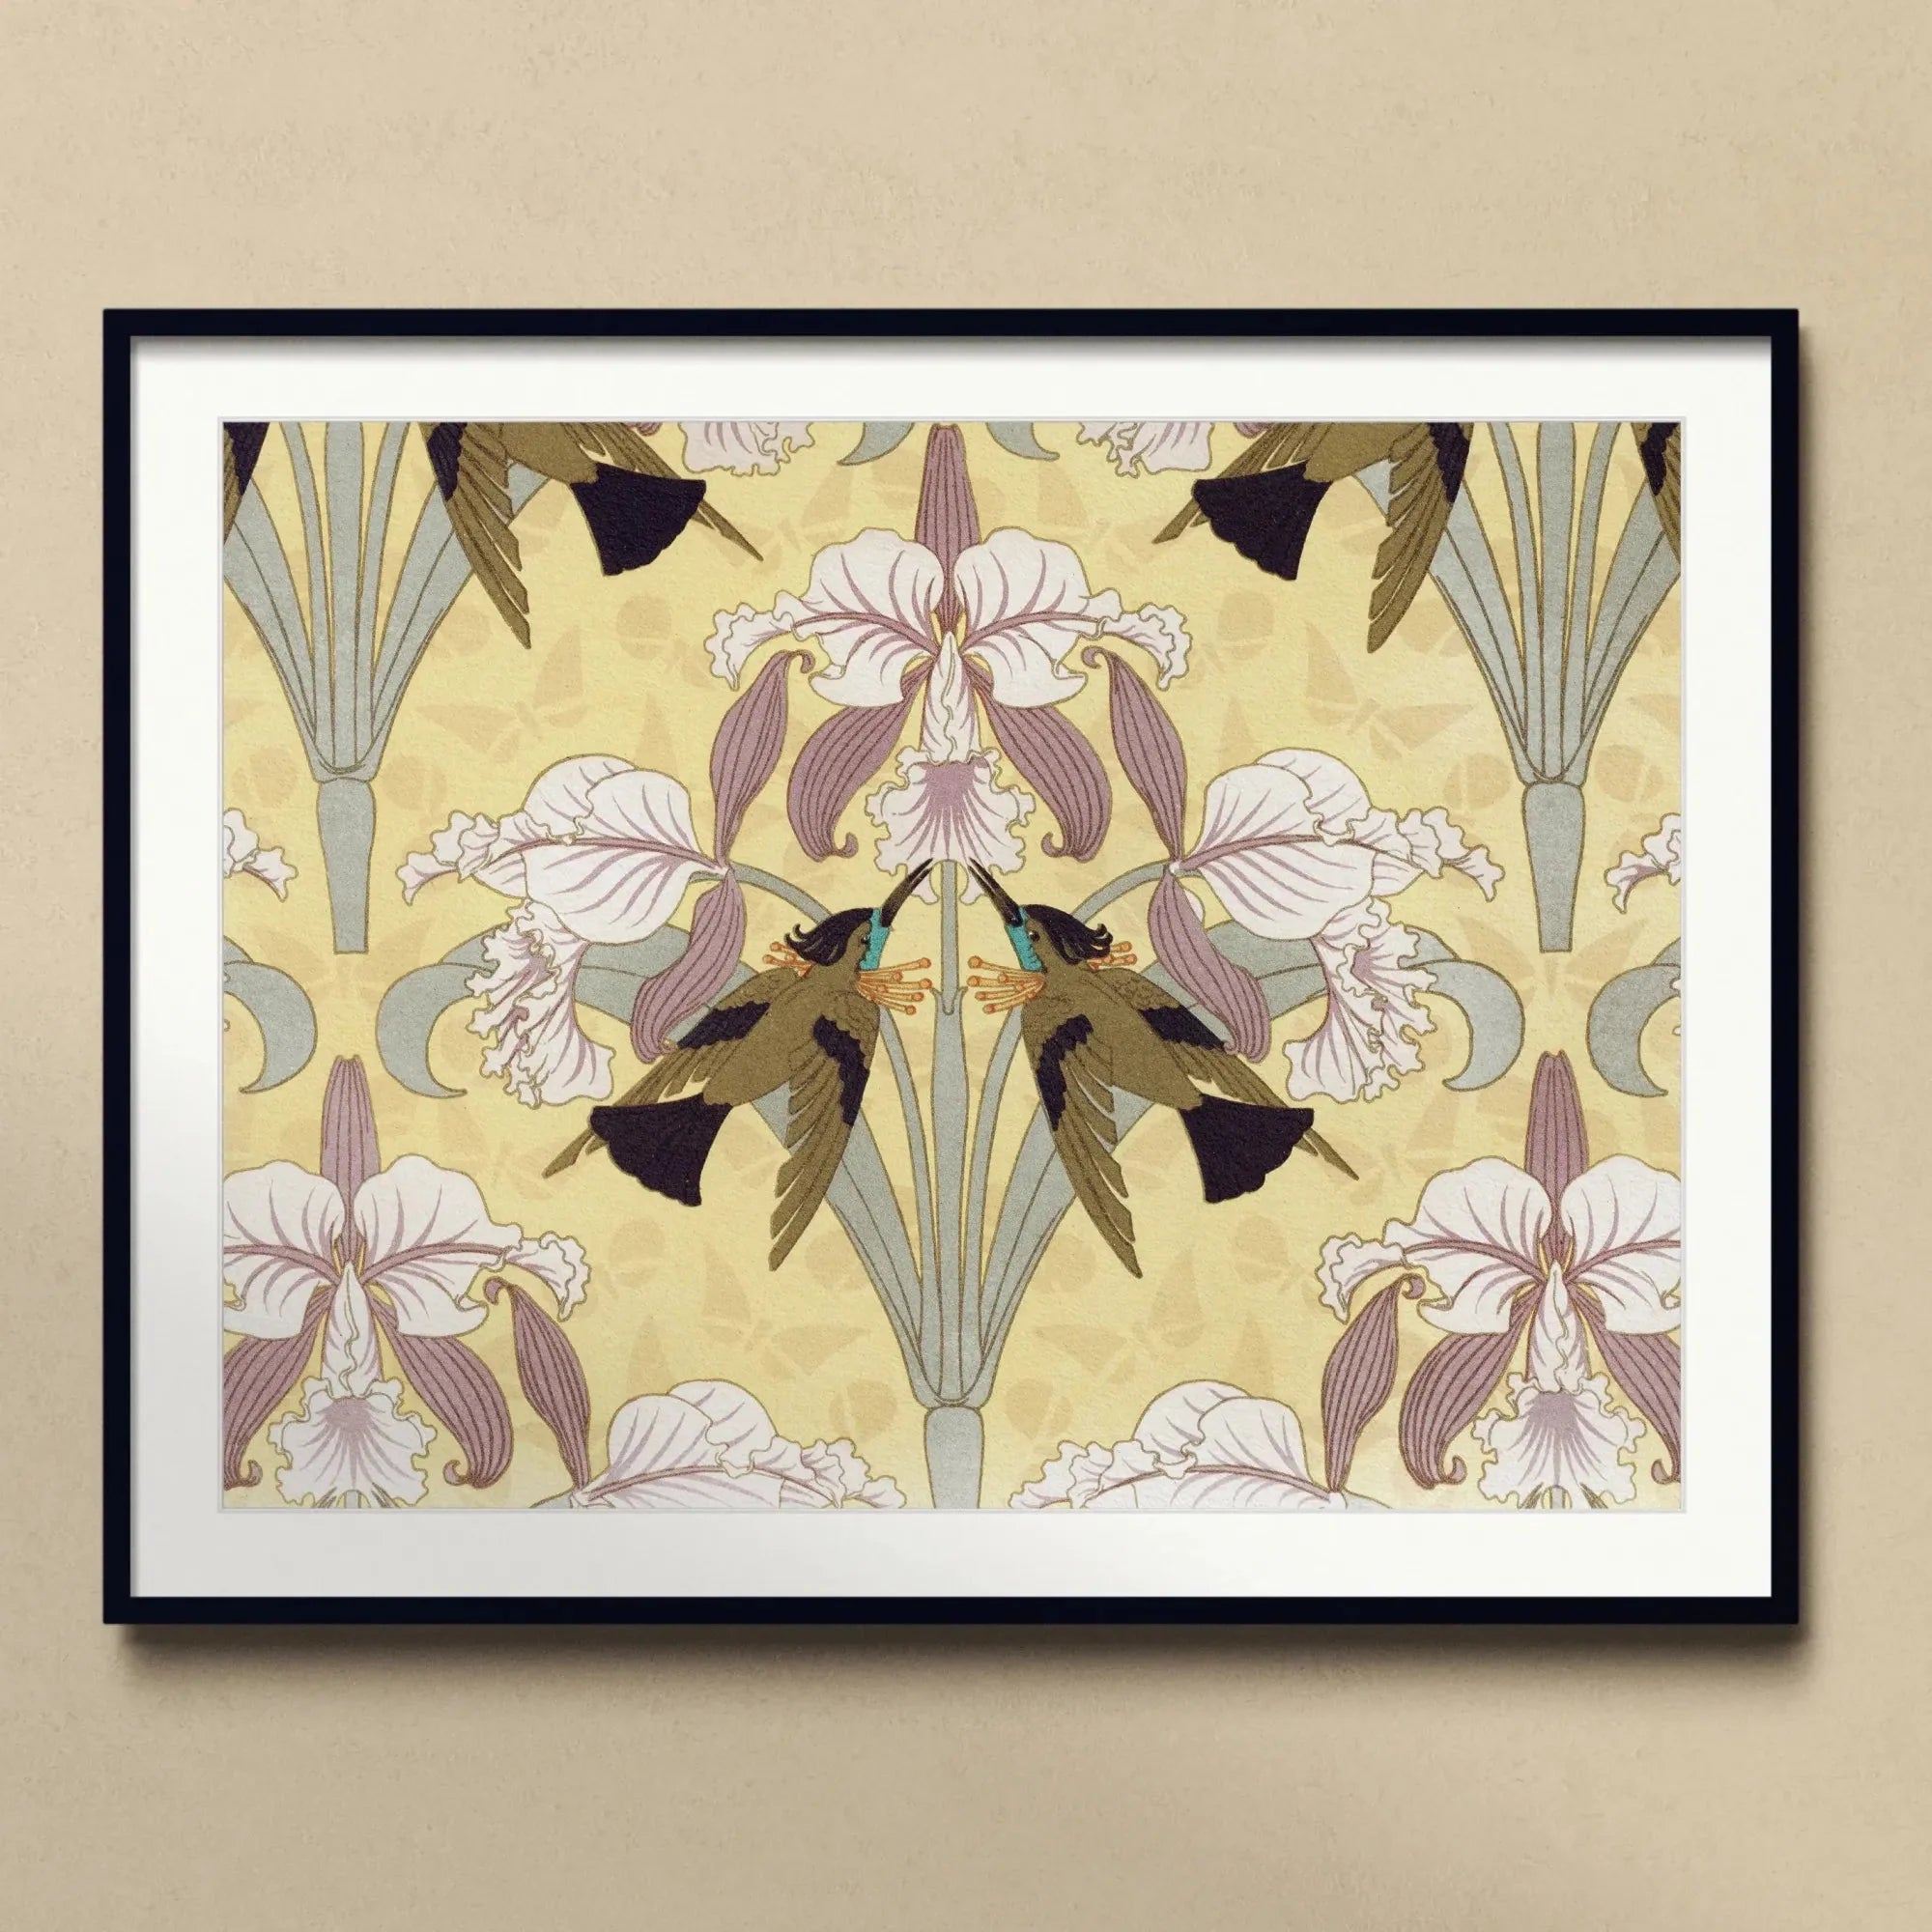 Oiseaux-mouches Et Orchidées By Maurice Pillard Verneuil Framed & Mounted Print - Posters Prints & Visual Artwork